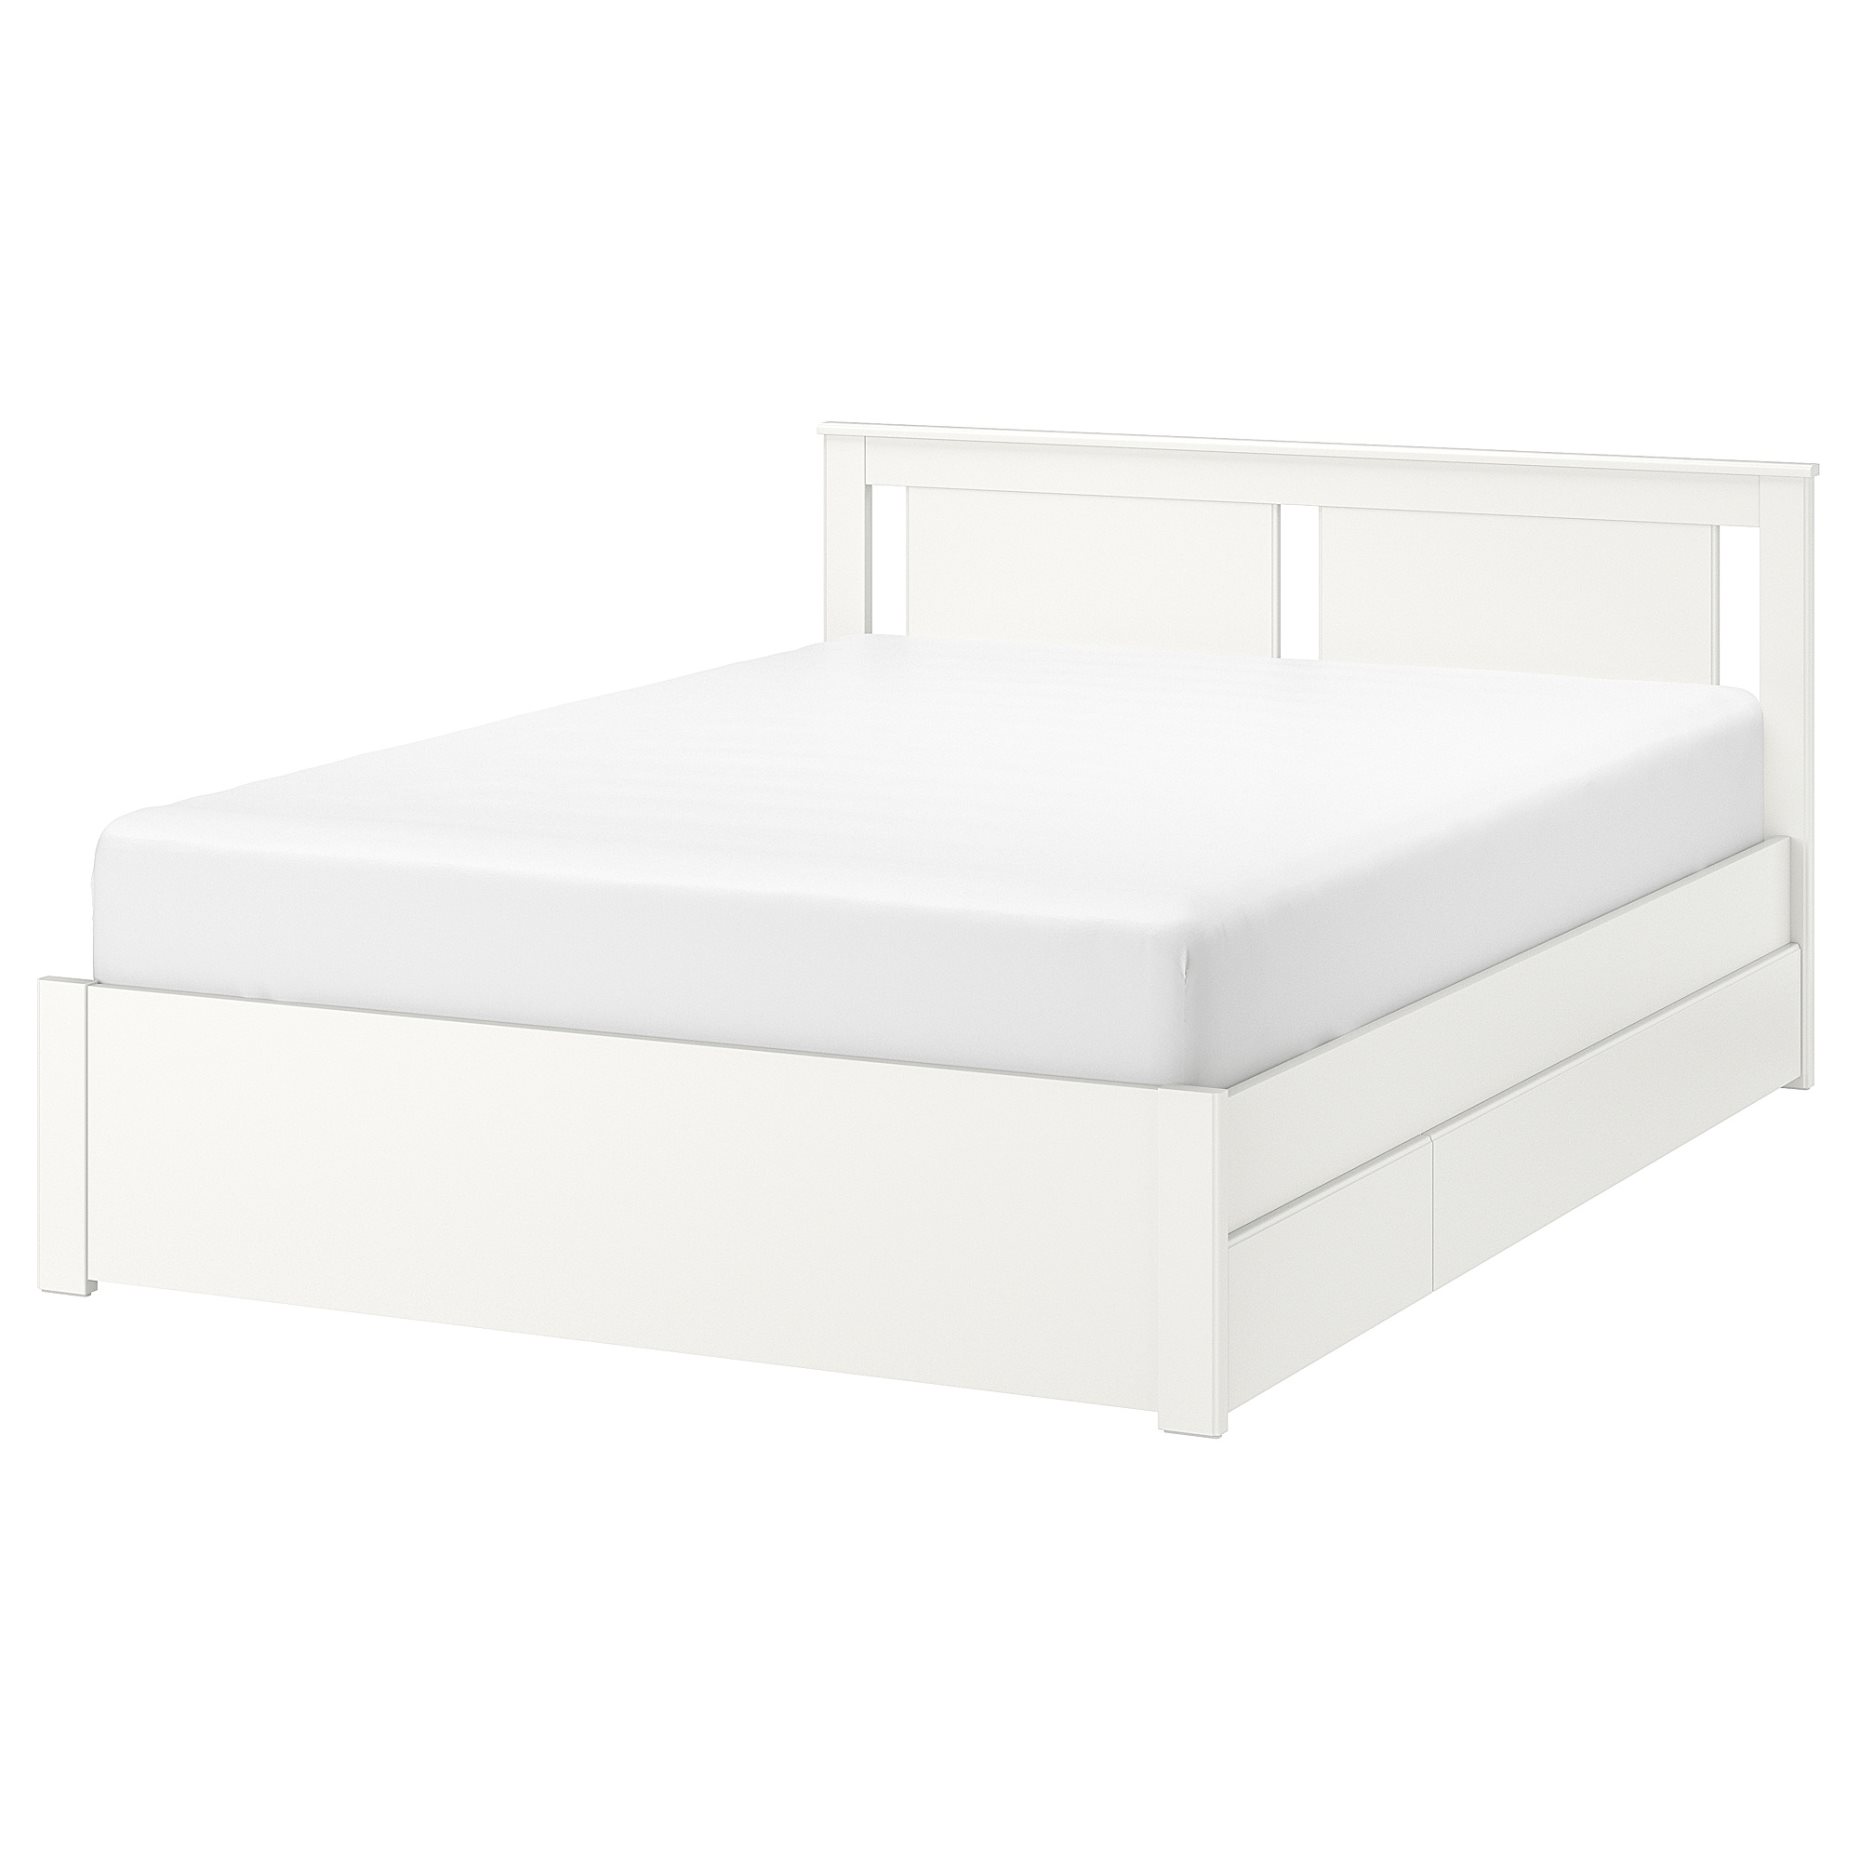 SONGESAND, bed frame with 2 storage boxes, 160X200 cm, 592.412.53